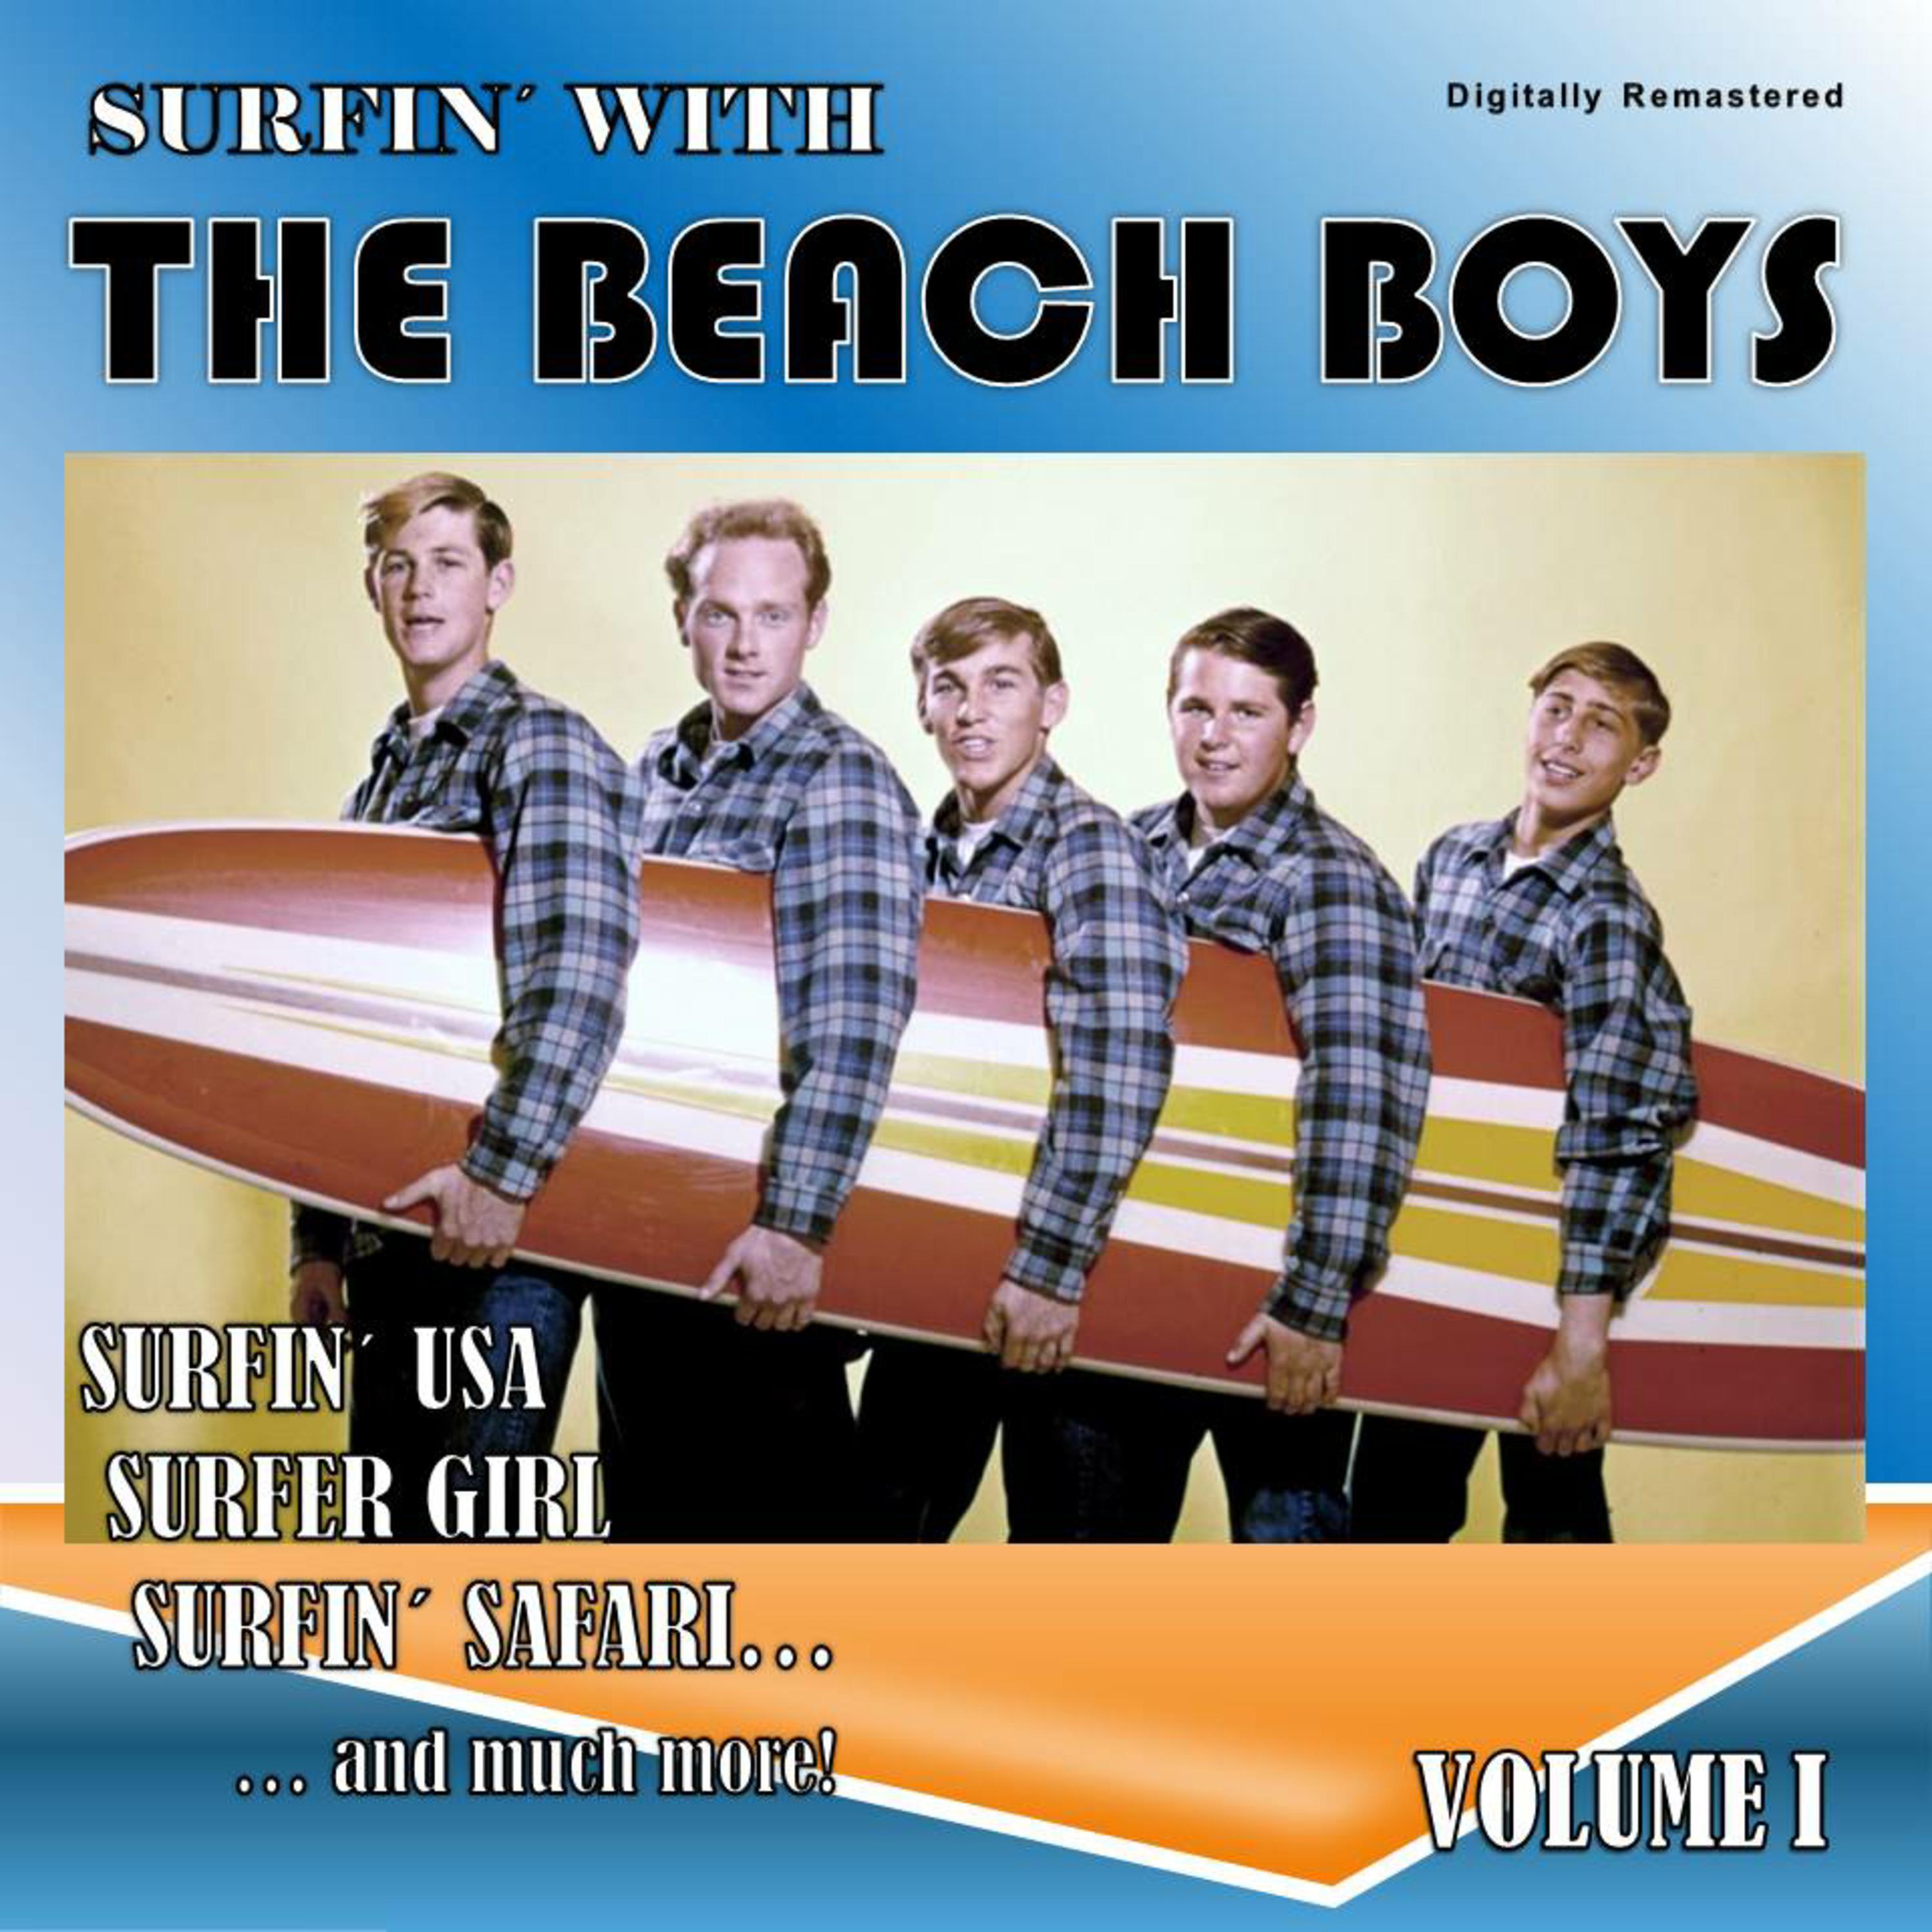 Surfin' with the Beach Boys, Vol. 1 (Digitally Remastered)